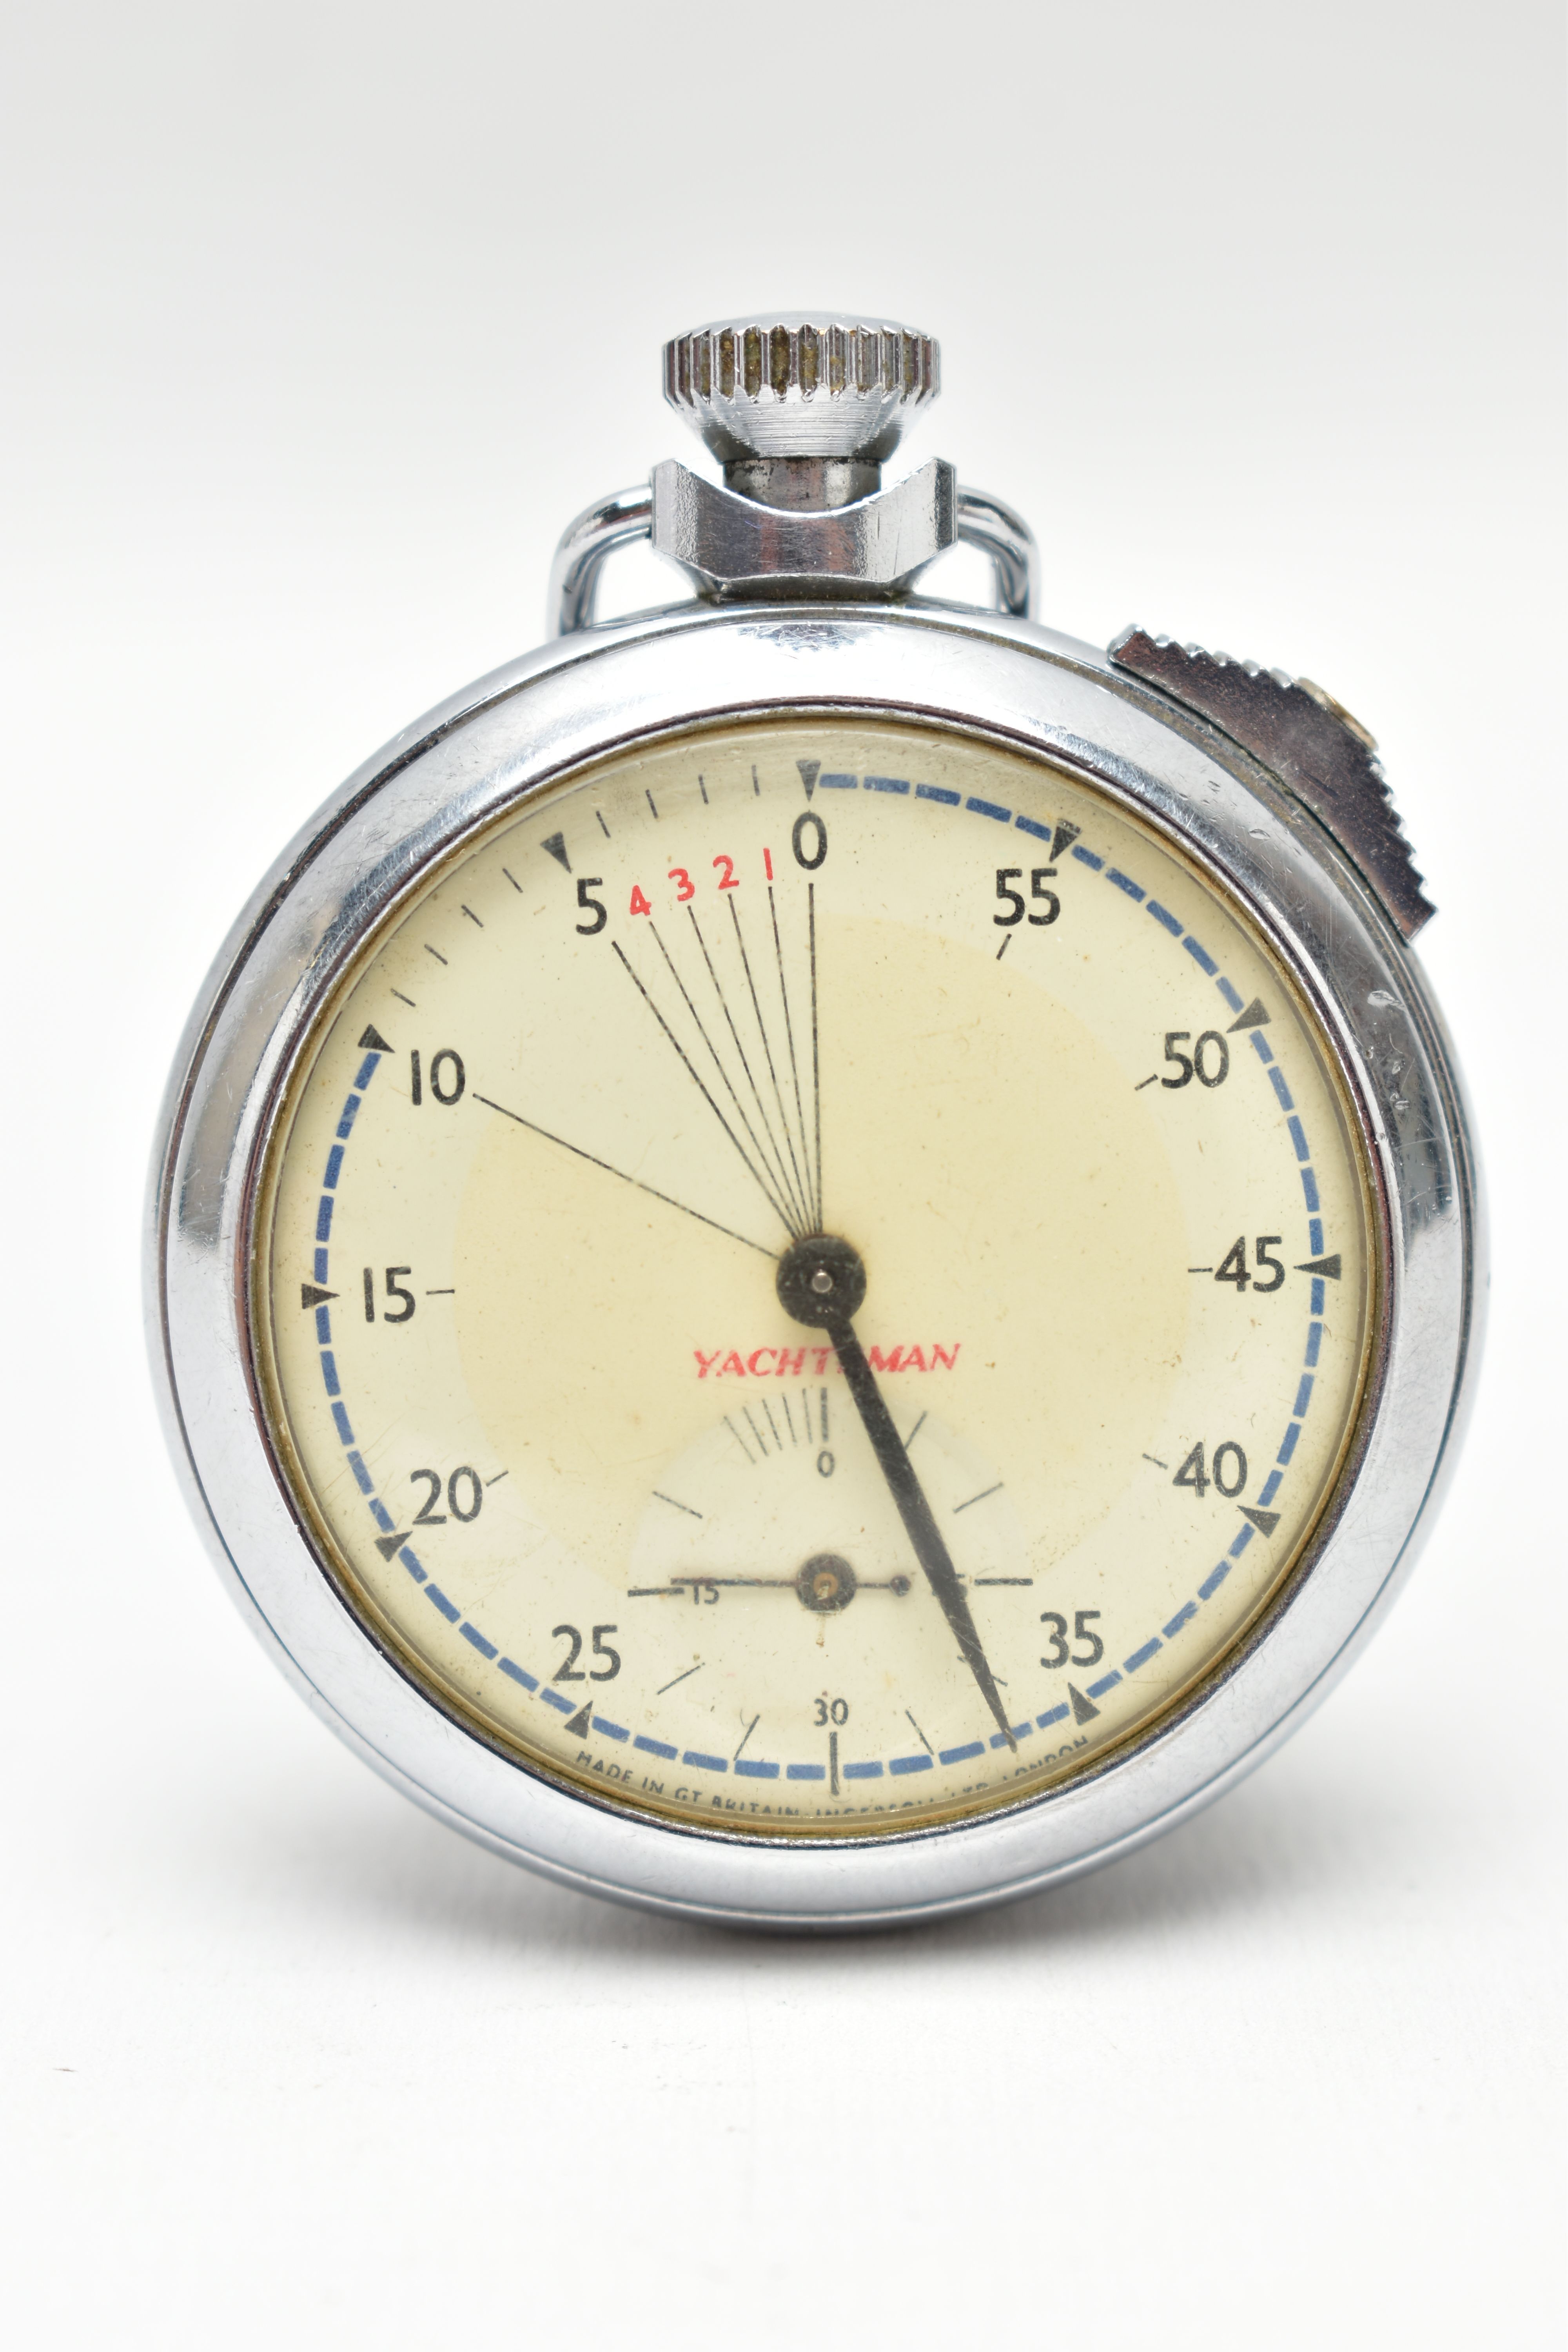 YACHTSMAN STOPWATCH BY INGERSOLL, LONDON, ticking but cannot comment as to its accuracy